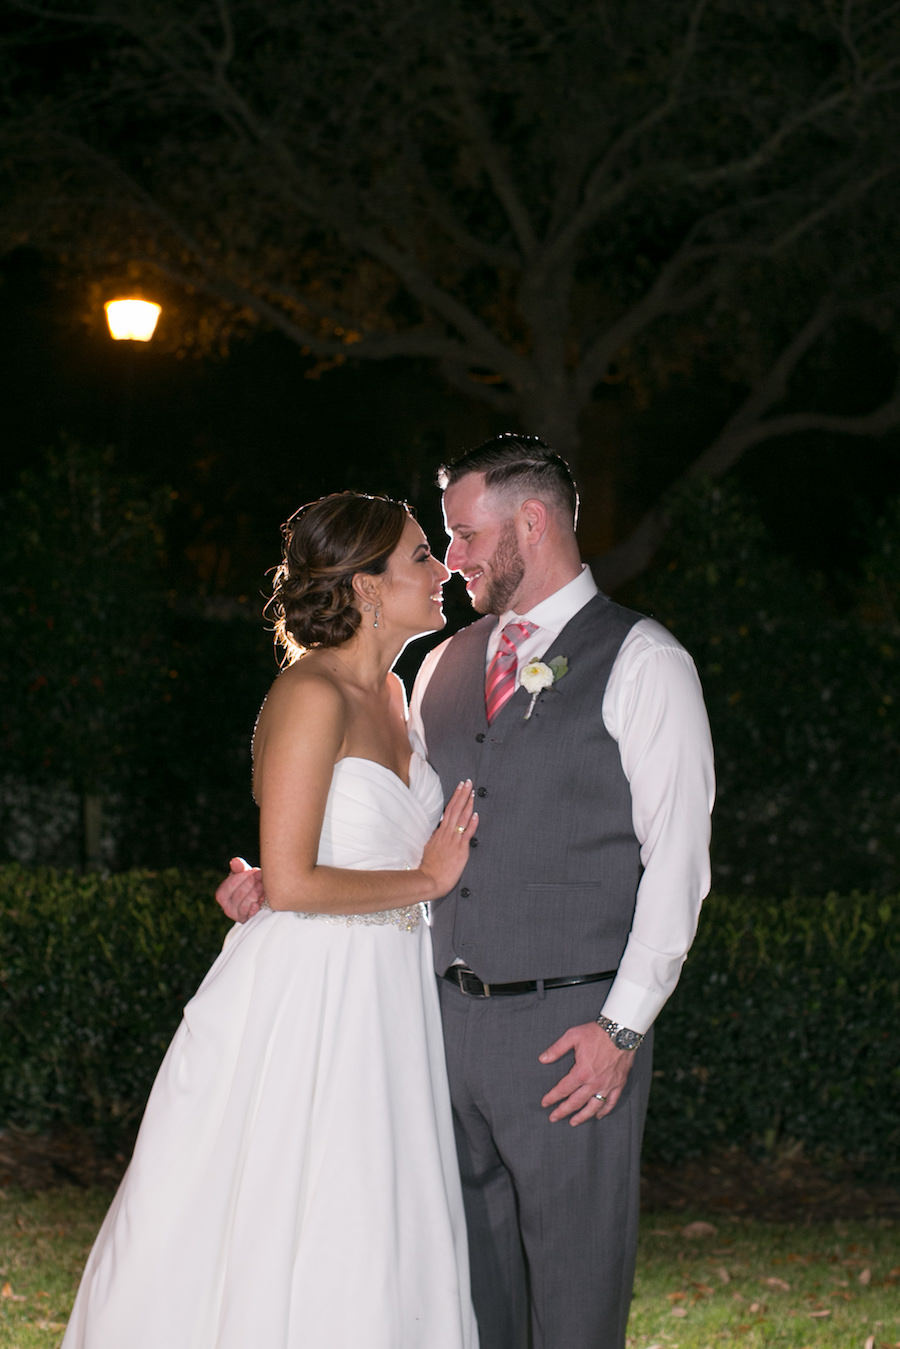 Outdoor, Nighttime, Bride and Groom Wedding Portrait in Grey Groom's Suit and Strapless, Ivory Wedding Dress | Tampa Wedding Photographer Carries Wiles Photography